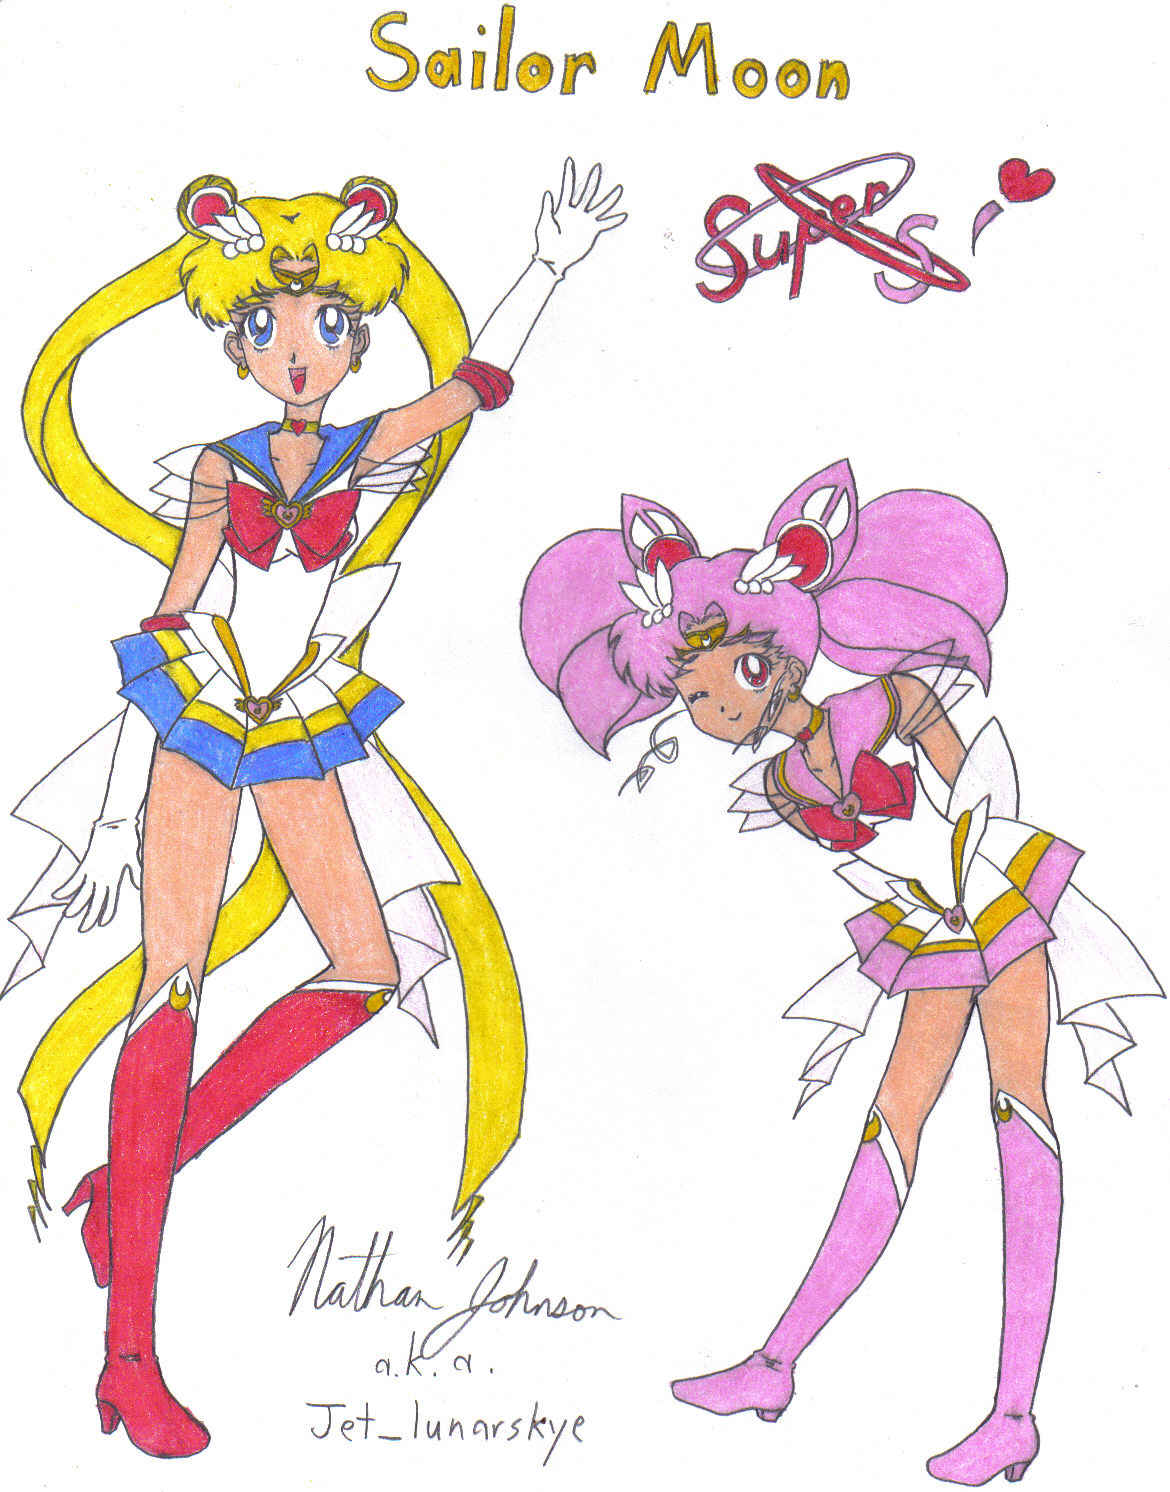 Sailor Moon and Chibi-moon SuperS by Jet_lunarskye